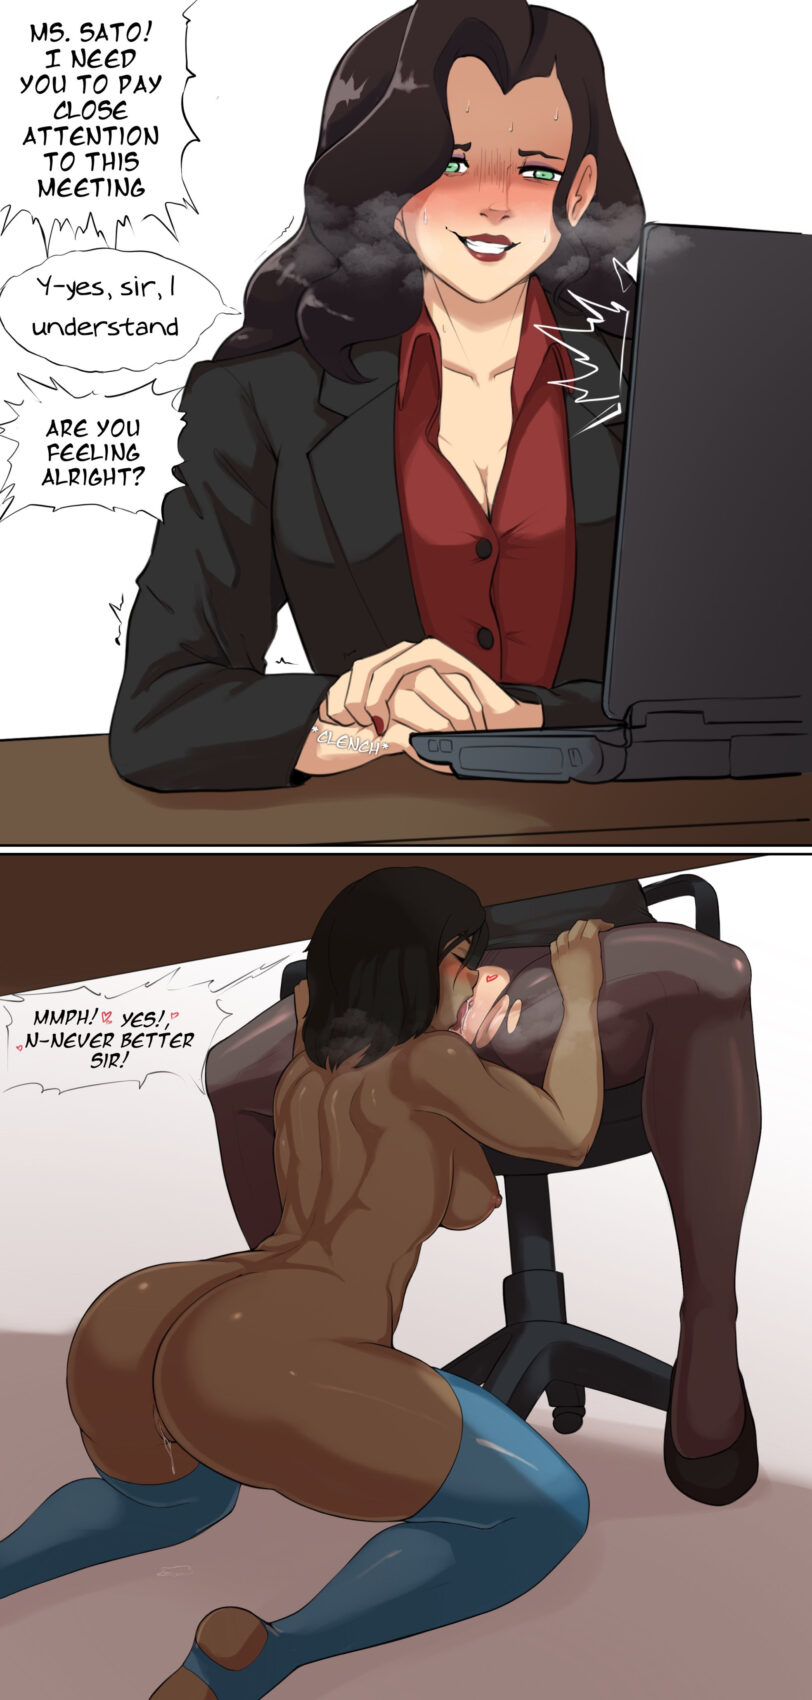 Nudiedoodles - Asami Sato getting her pussy eaten under the desk by Korra while shes in a office meeting 1